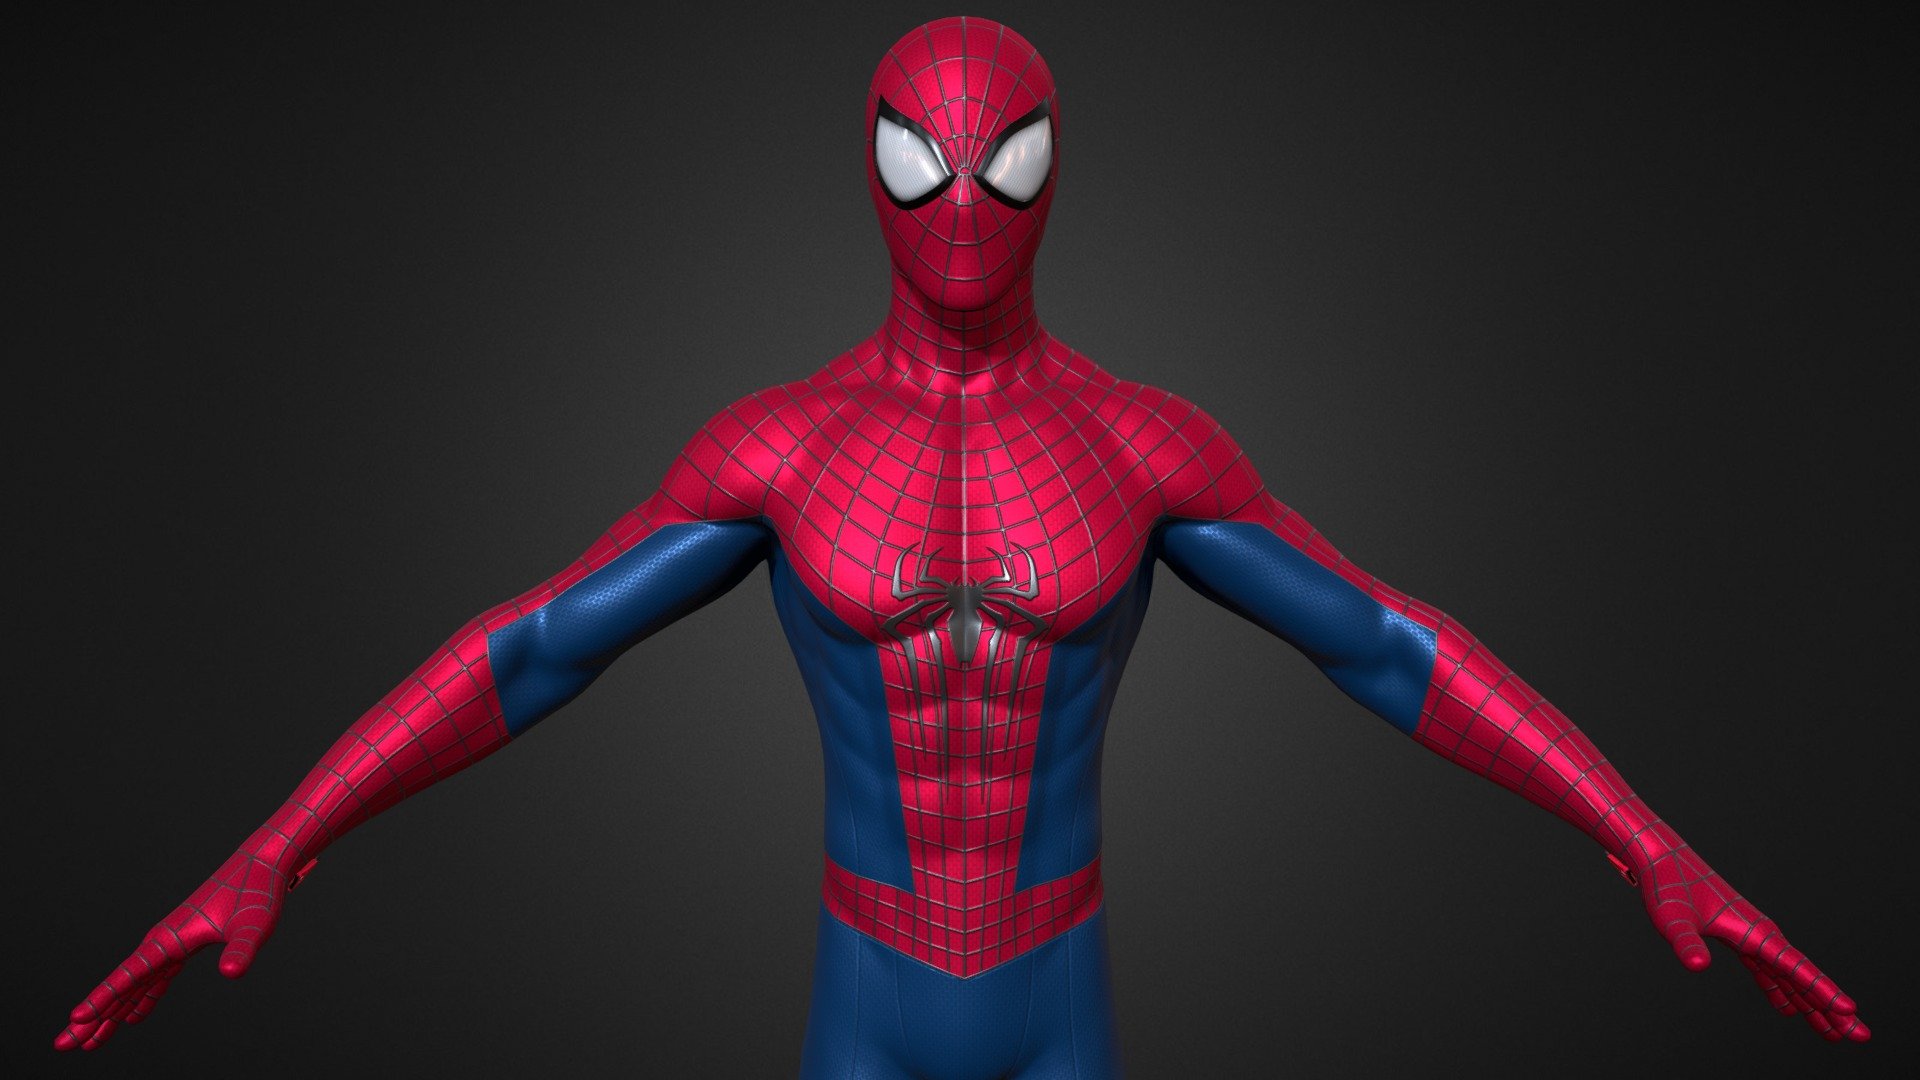 Spiderman comic books character published by Marvel Comics.




Model was made on Maya, Zbrush, substance painter and Blender

This model is  inspired by The amazing spider-man movie.

The model has a The amazing spider-man suit.

High quality texture work.

The model come with complete 4k textures and Blender, FBX And OBJ file formats

The model has 2 materials contains 6 maps Basecolor, Roughness, Metalness, Specular, Normal and Ao

All textures and materials are included and mapped. (4k resoulutions)

No special plugin needed to open scene

The model can be rigg easily
 - The Amazing Spider-Man - Buy Royalty Free 3D model by AFSHAN ALI (@Aliflex) 3d model